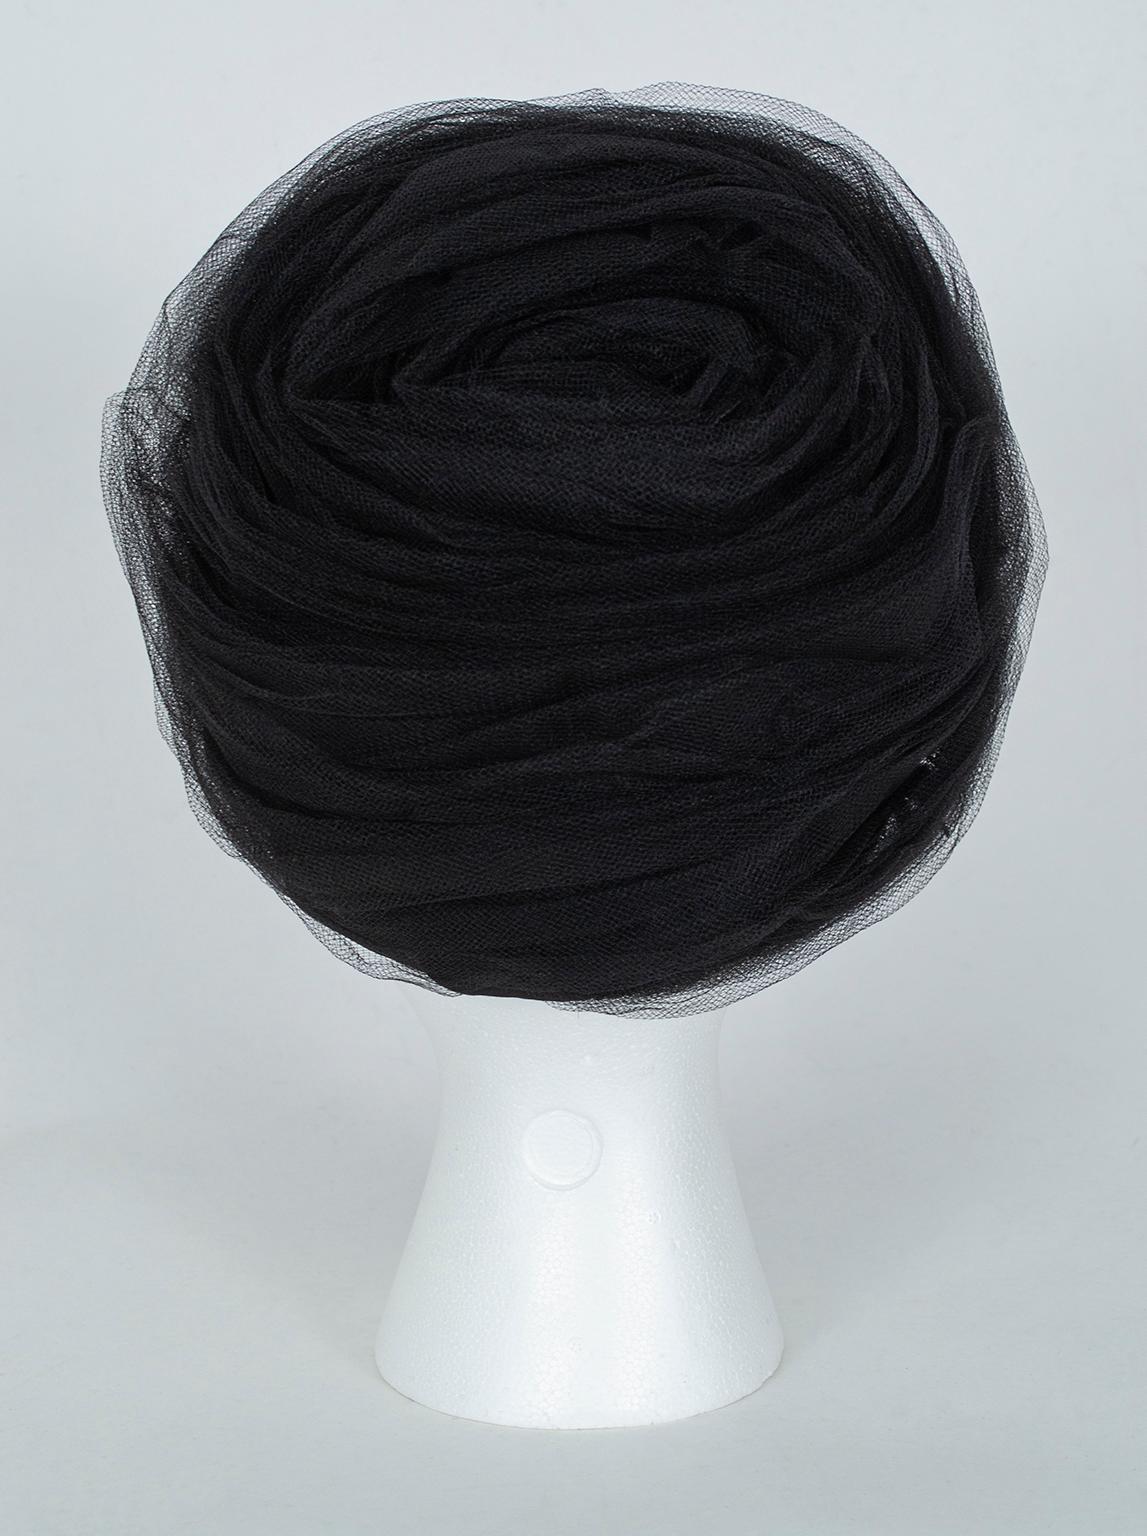 Black Tulle Cocktail Turban Hat with Chandelier Bead Floral Trim - S, 1960s In Excellent Condition For Sale In Tucson, AZ